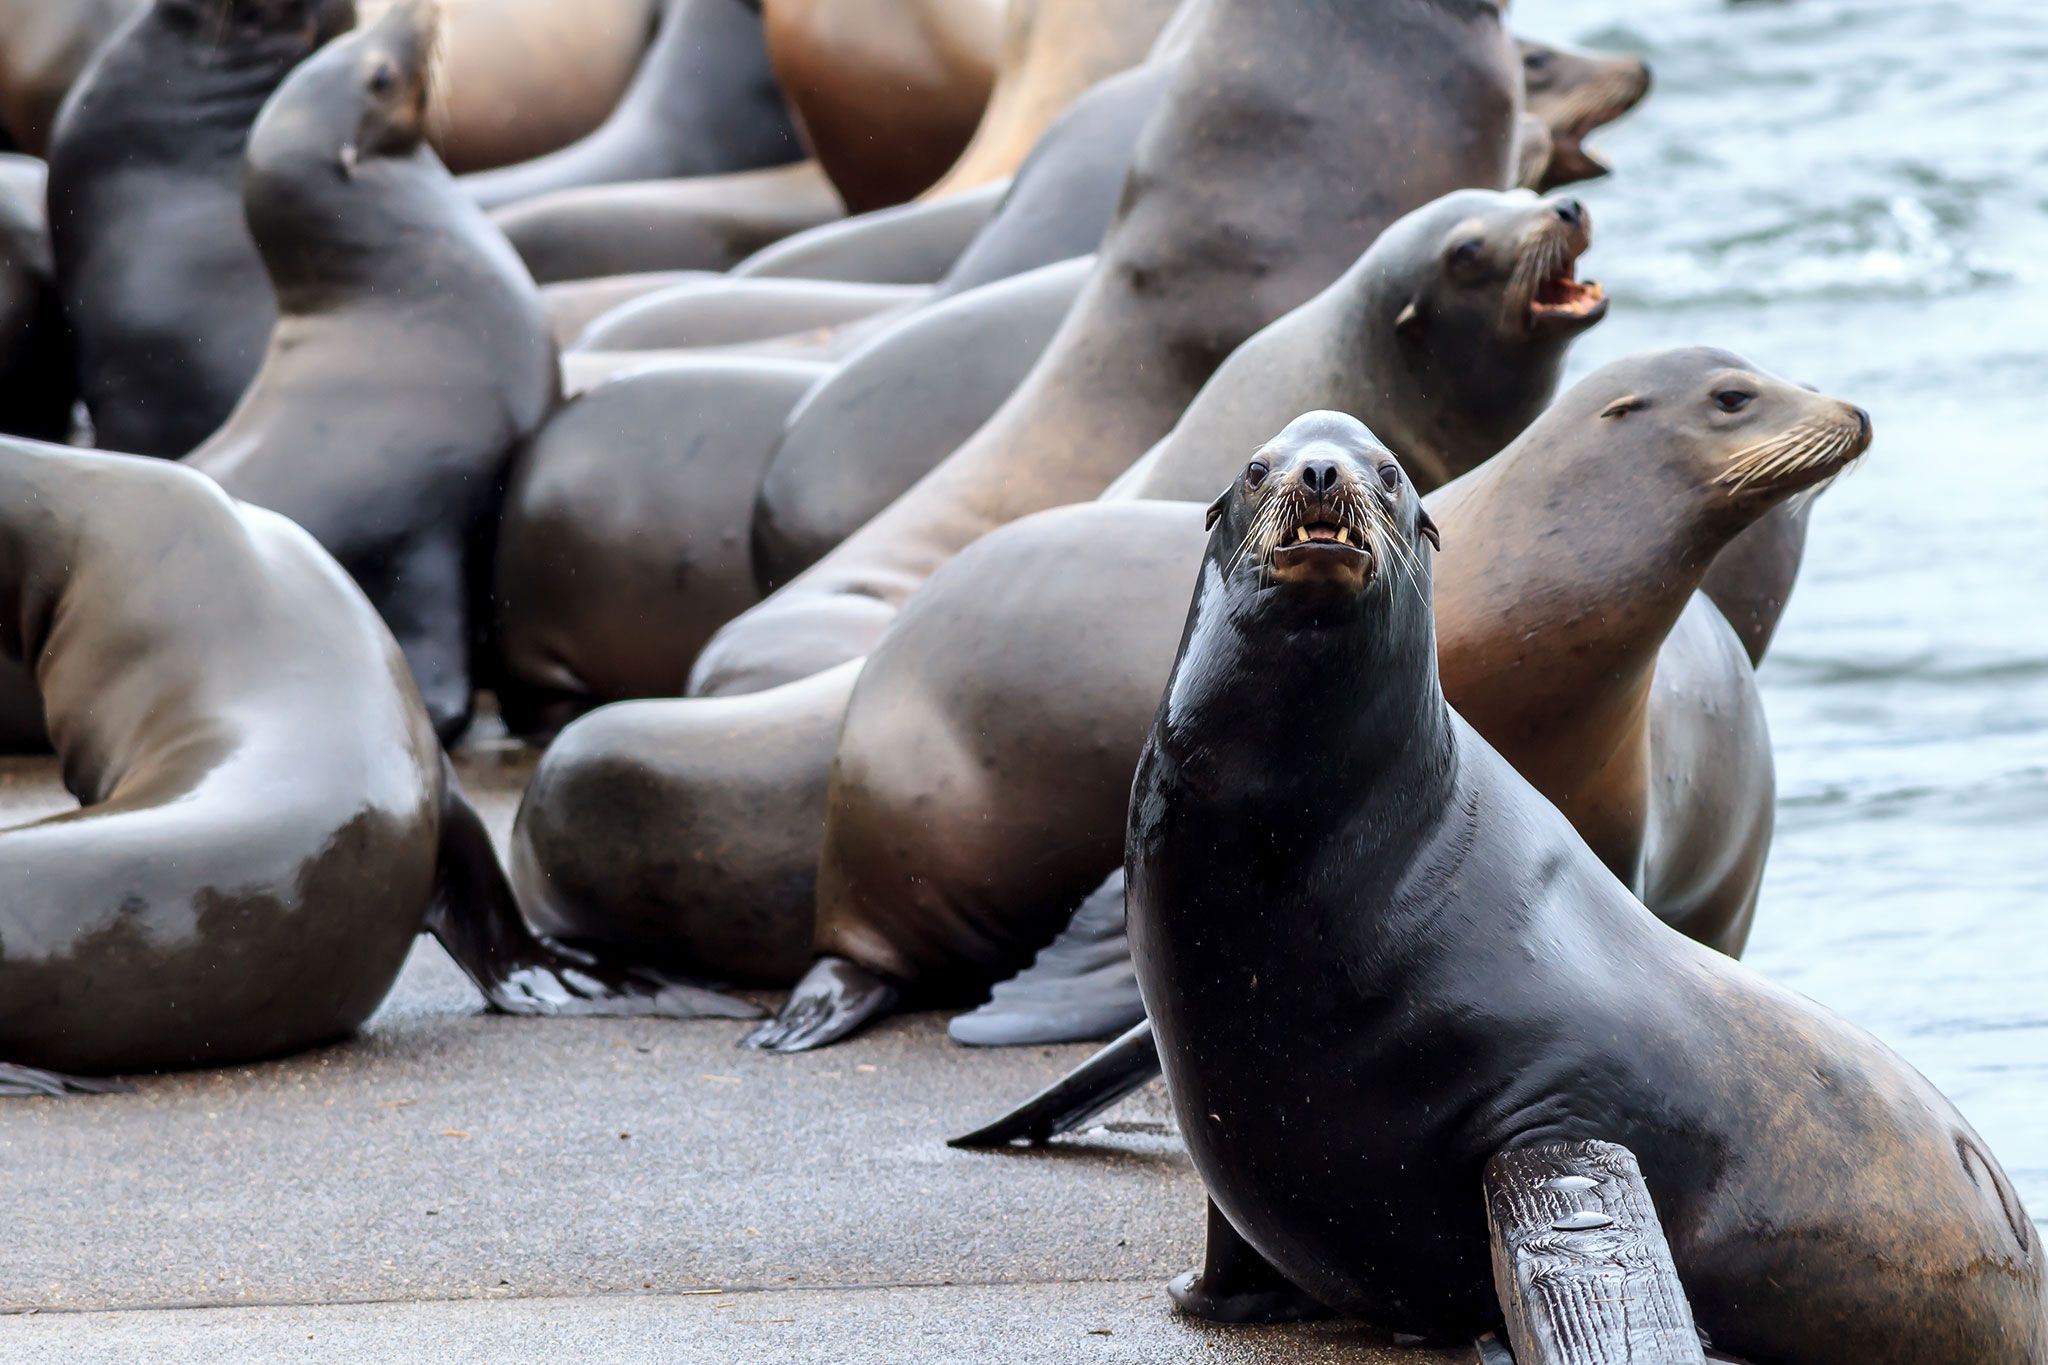 A group of shiny brown seals are gathered close together on the edge of a wet cement block near the water’s edge, with one particularly close seal staring straight at the camera.